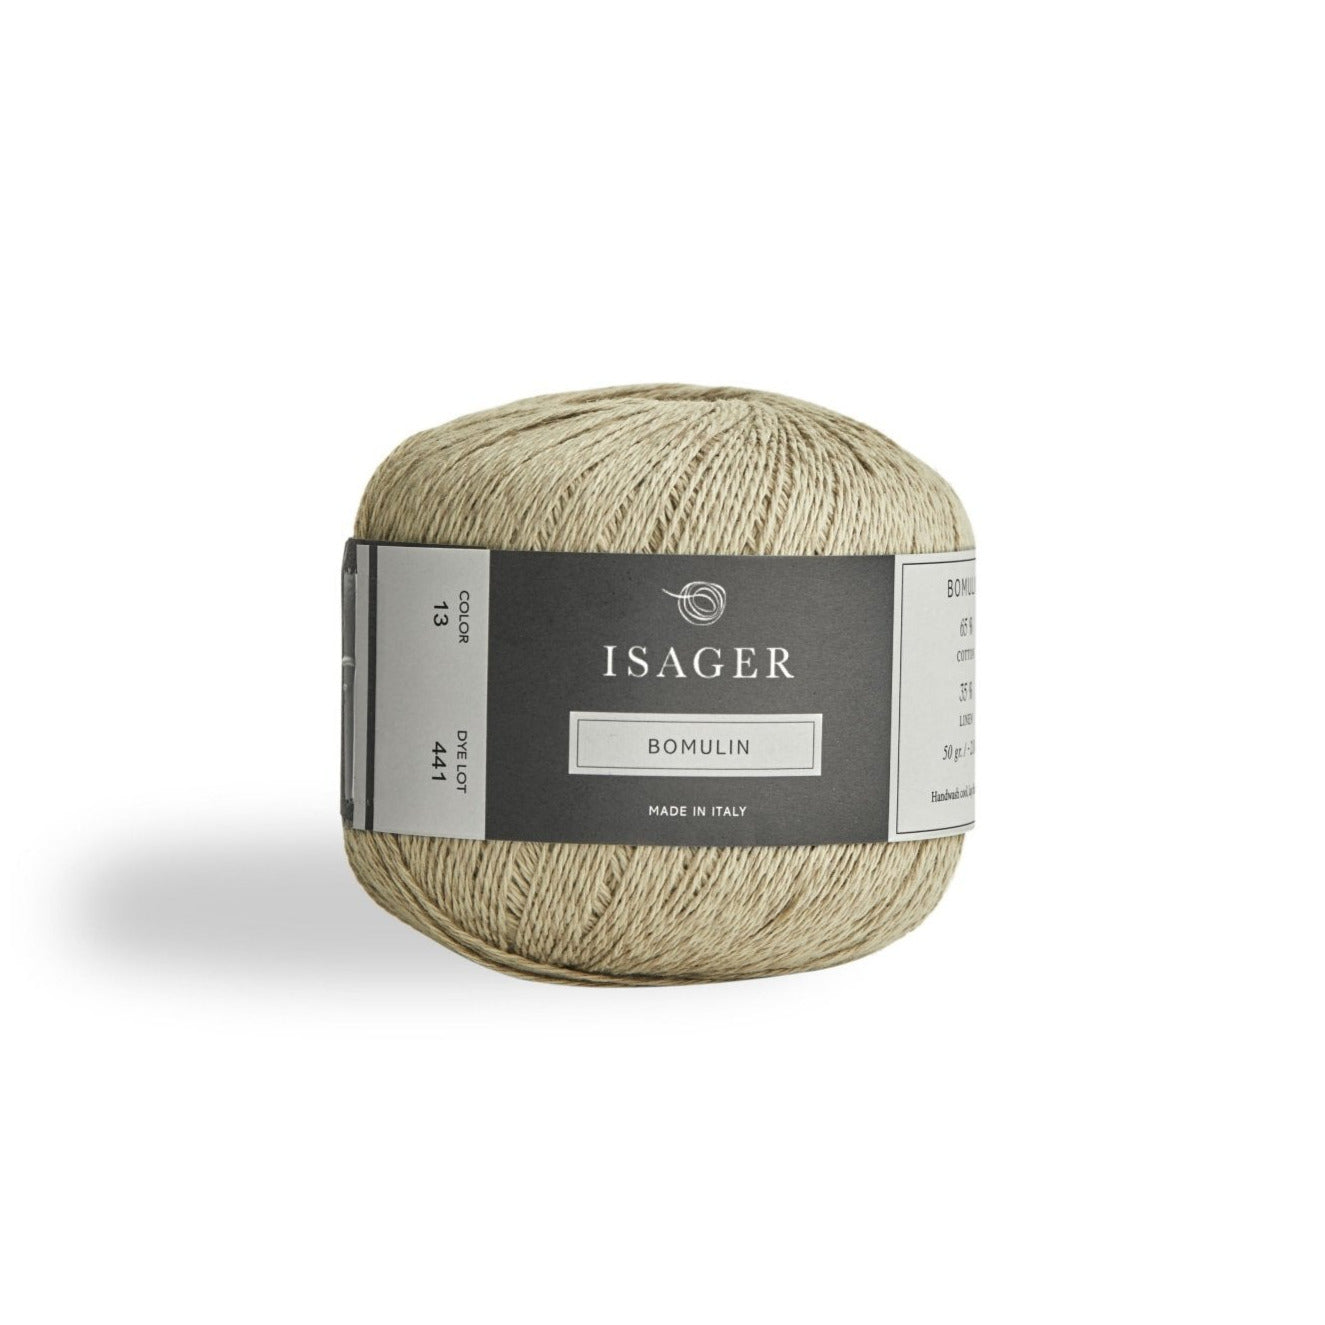 Isager Bomulin - 13 - 3 Ply - Cotton - The Little Yarn Store